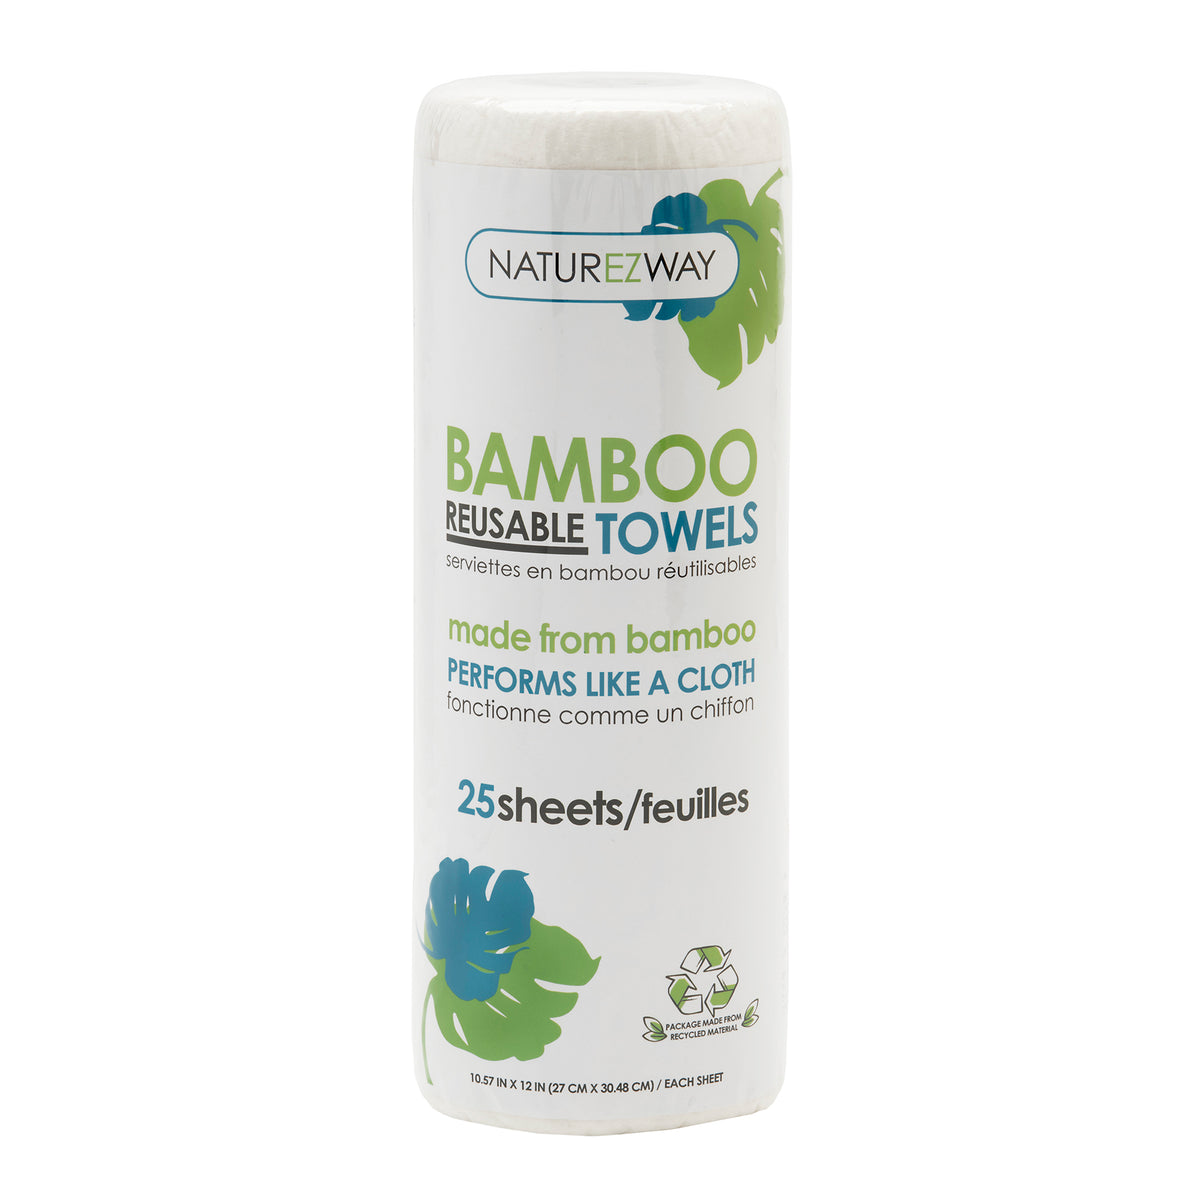 Washable Organic Bamboo Paper Towel Roll - 20 Sheets